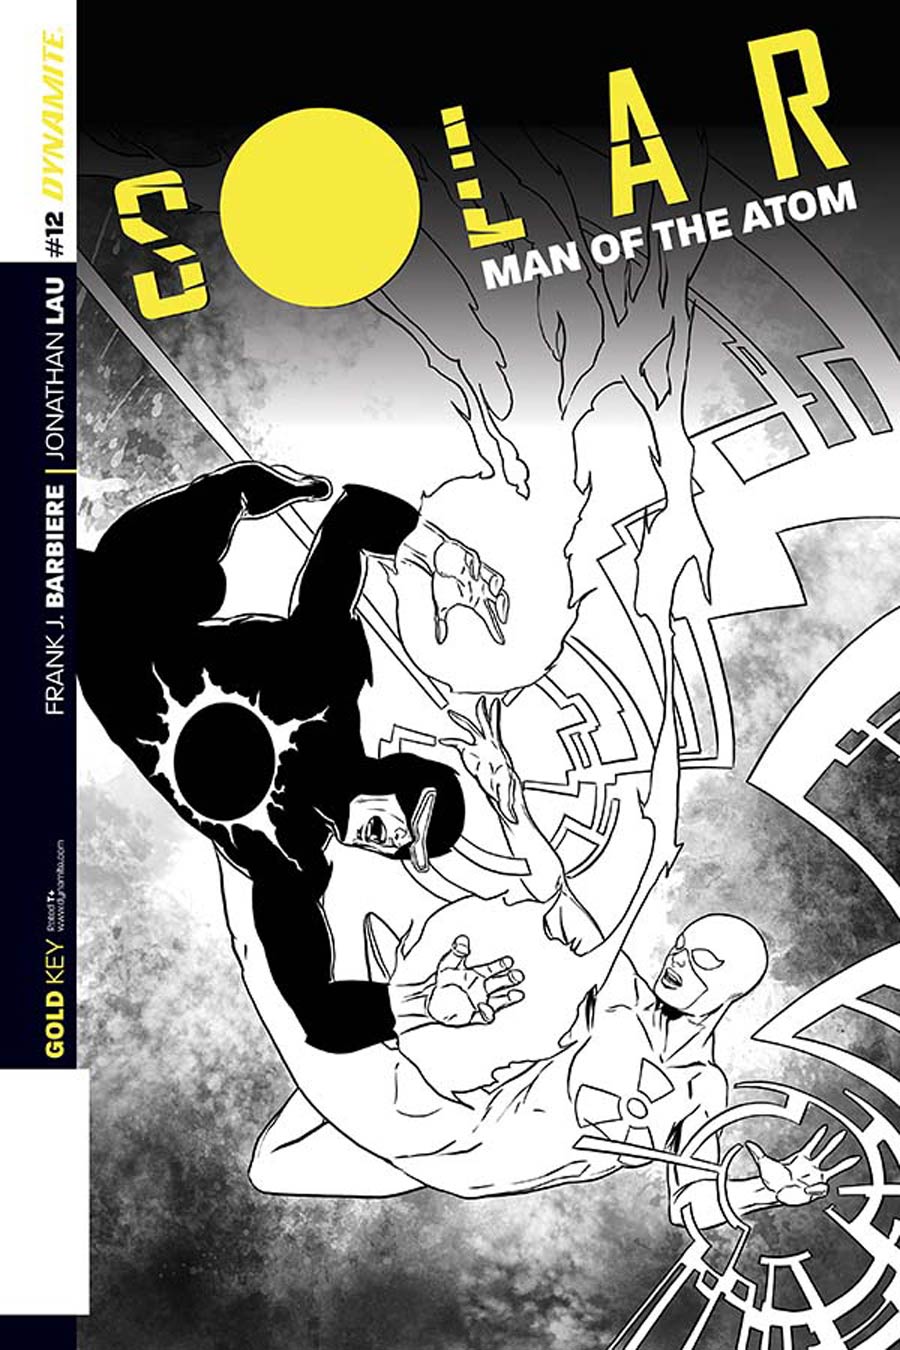 Solar Man Of The Atom Vol 2 #12 Cover C Incentive Marc Laming Black & White Cover